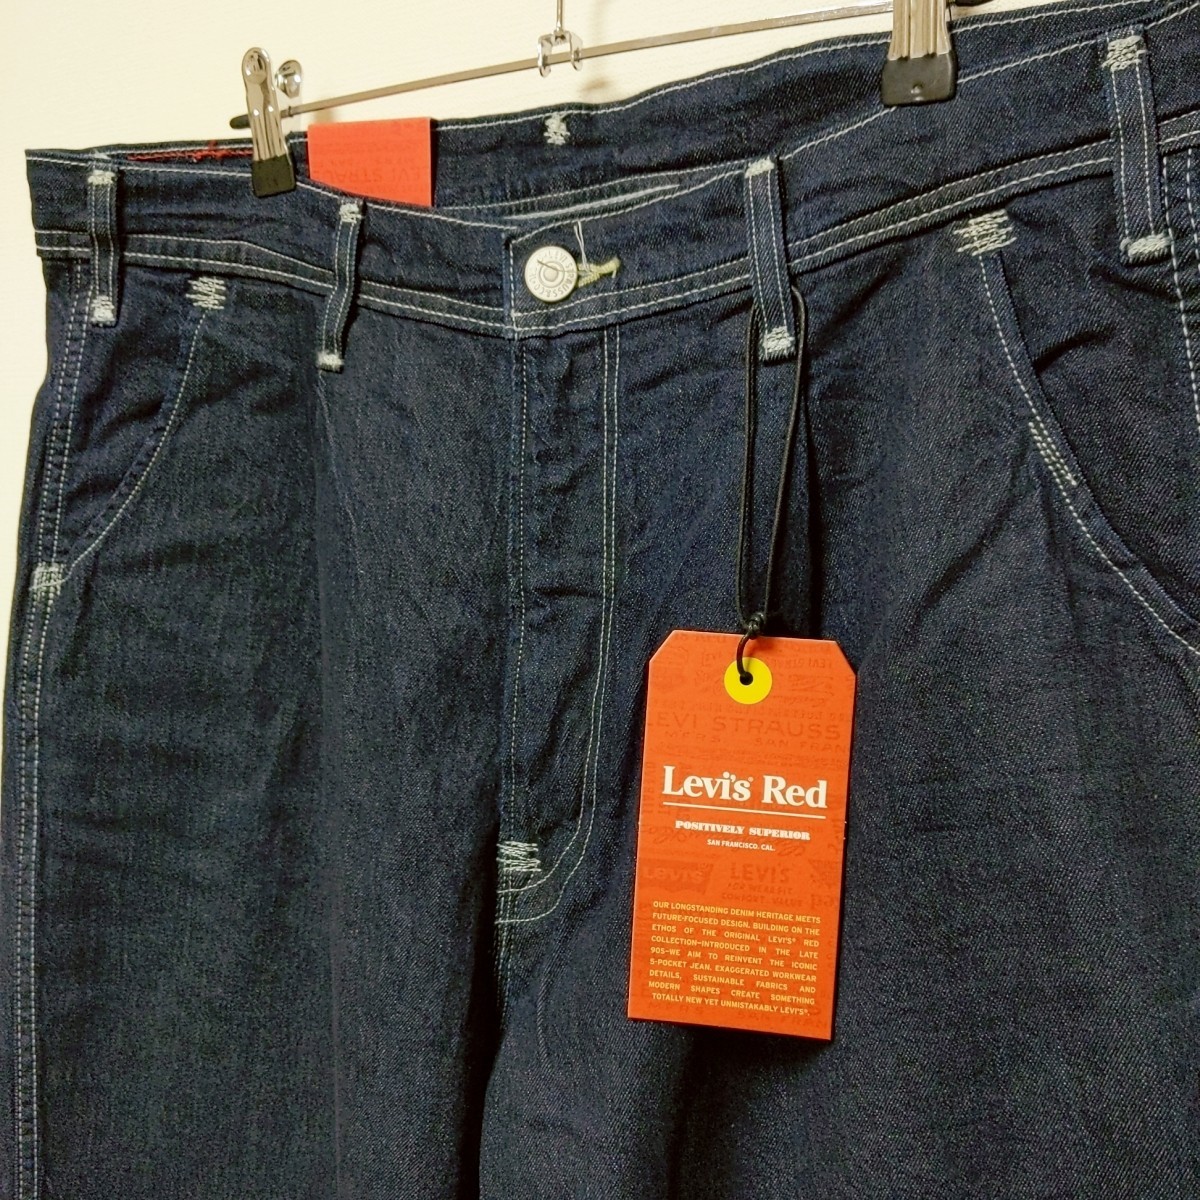 Levi's RED Pleated Trousers サイズW34L32 リーバイスレッド プリーテッドトラウザー 2021AW